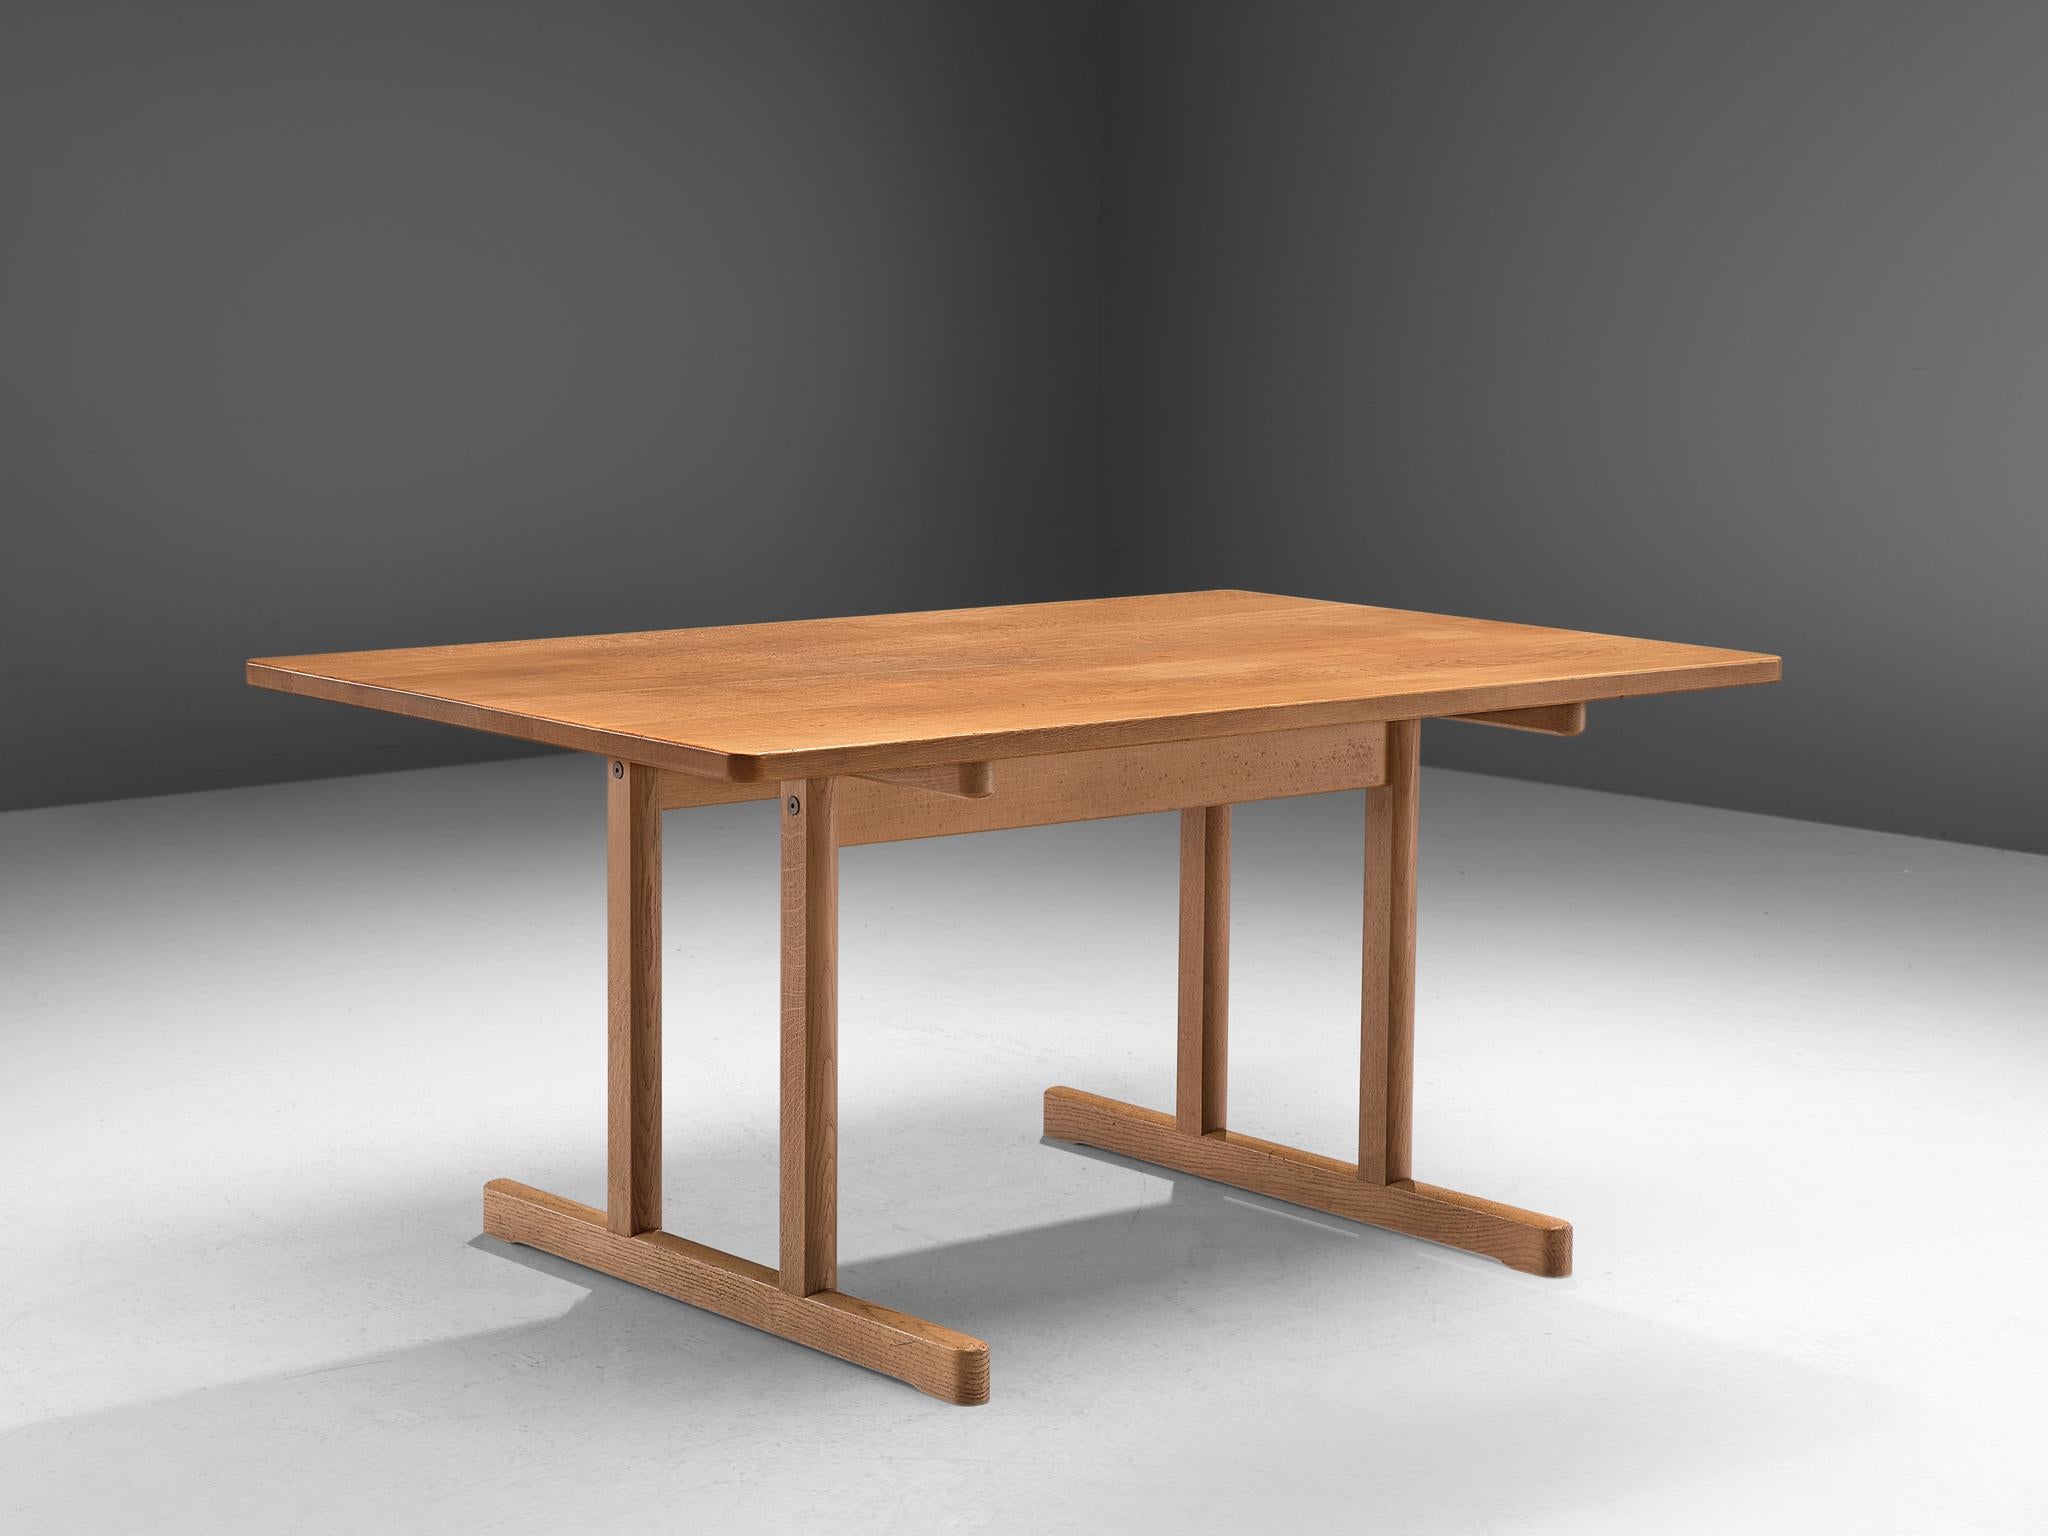 Børge Mogensen by Frederica Stolefabrik, shaker table C17, oak, Denmark, design 1944, production 1960s.

Mogensen’s iconic shaker table in solid oak was designed in 1944 when Mogensen was head of the FDB, the Danish Cooperative society. It was the